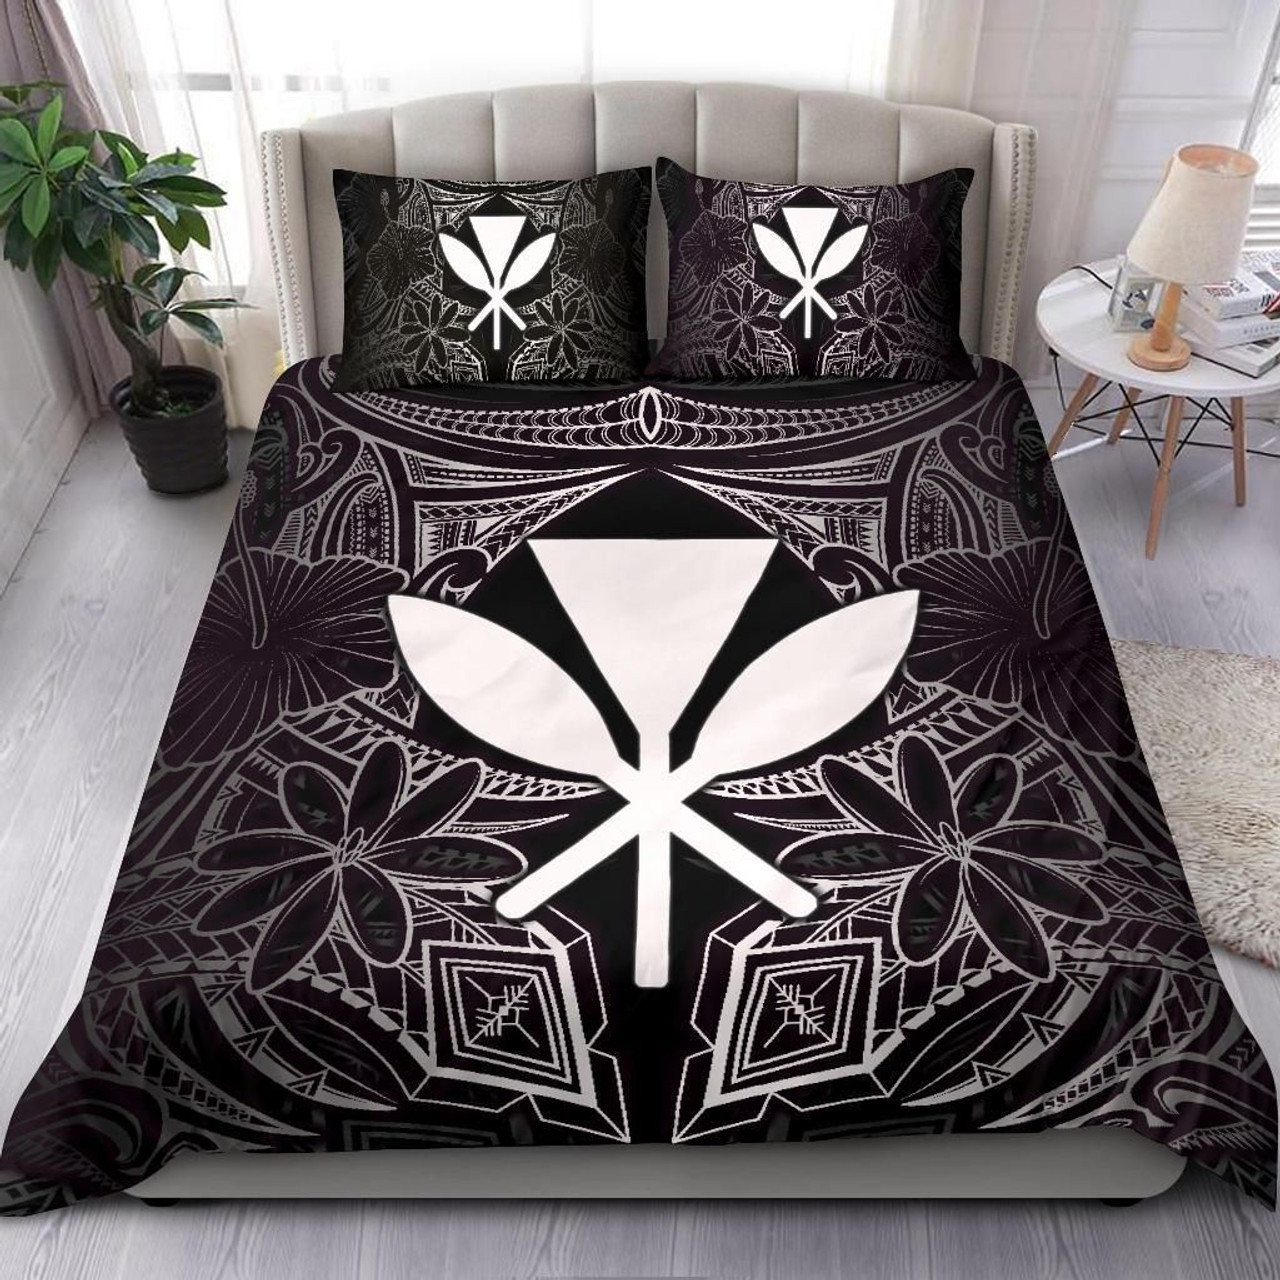 Polynesian Bedding Set - Hawaii Duvet Cover White Hibiscus Coat Of Arms 1